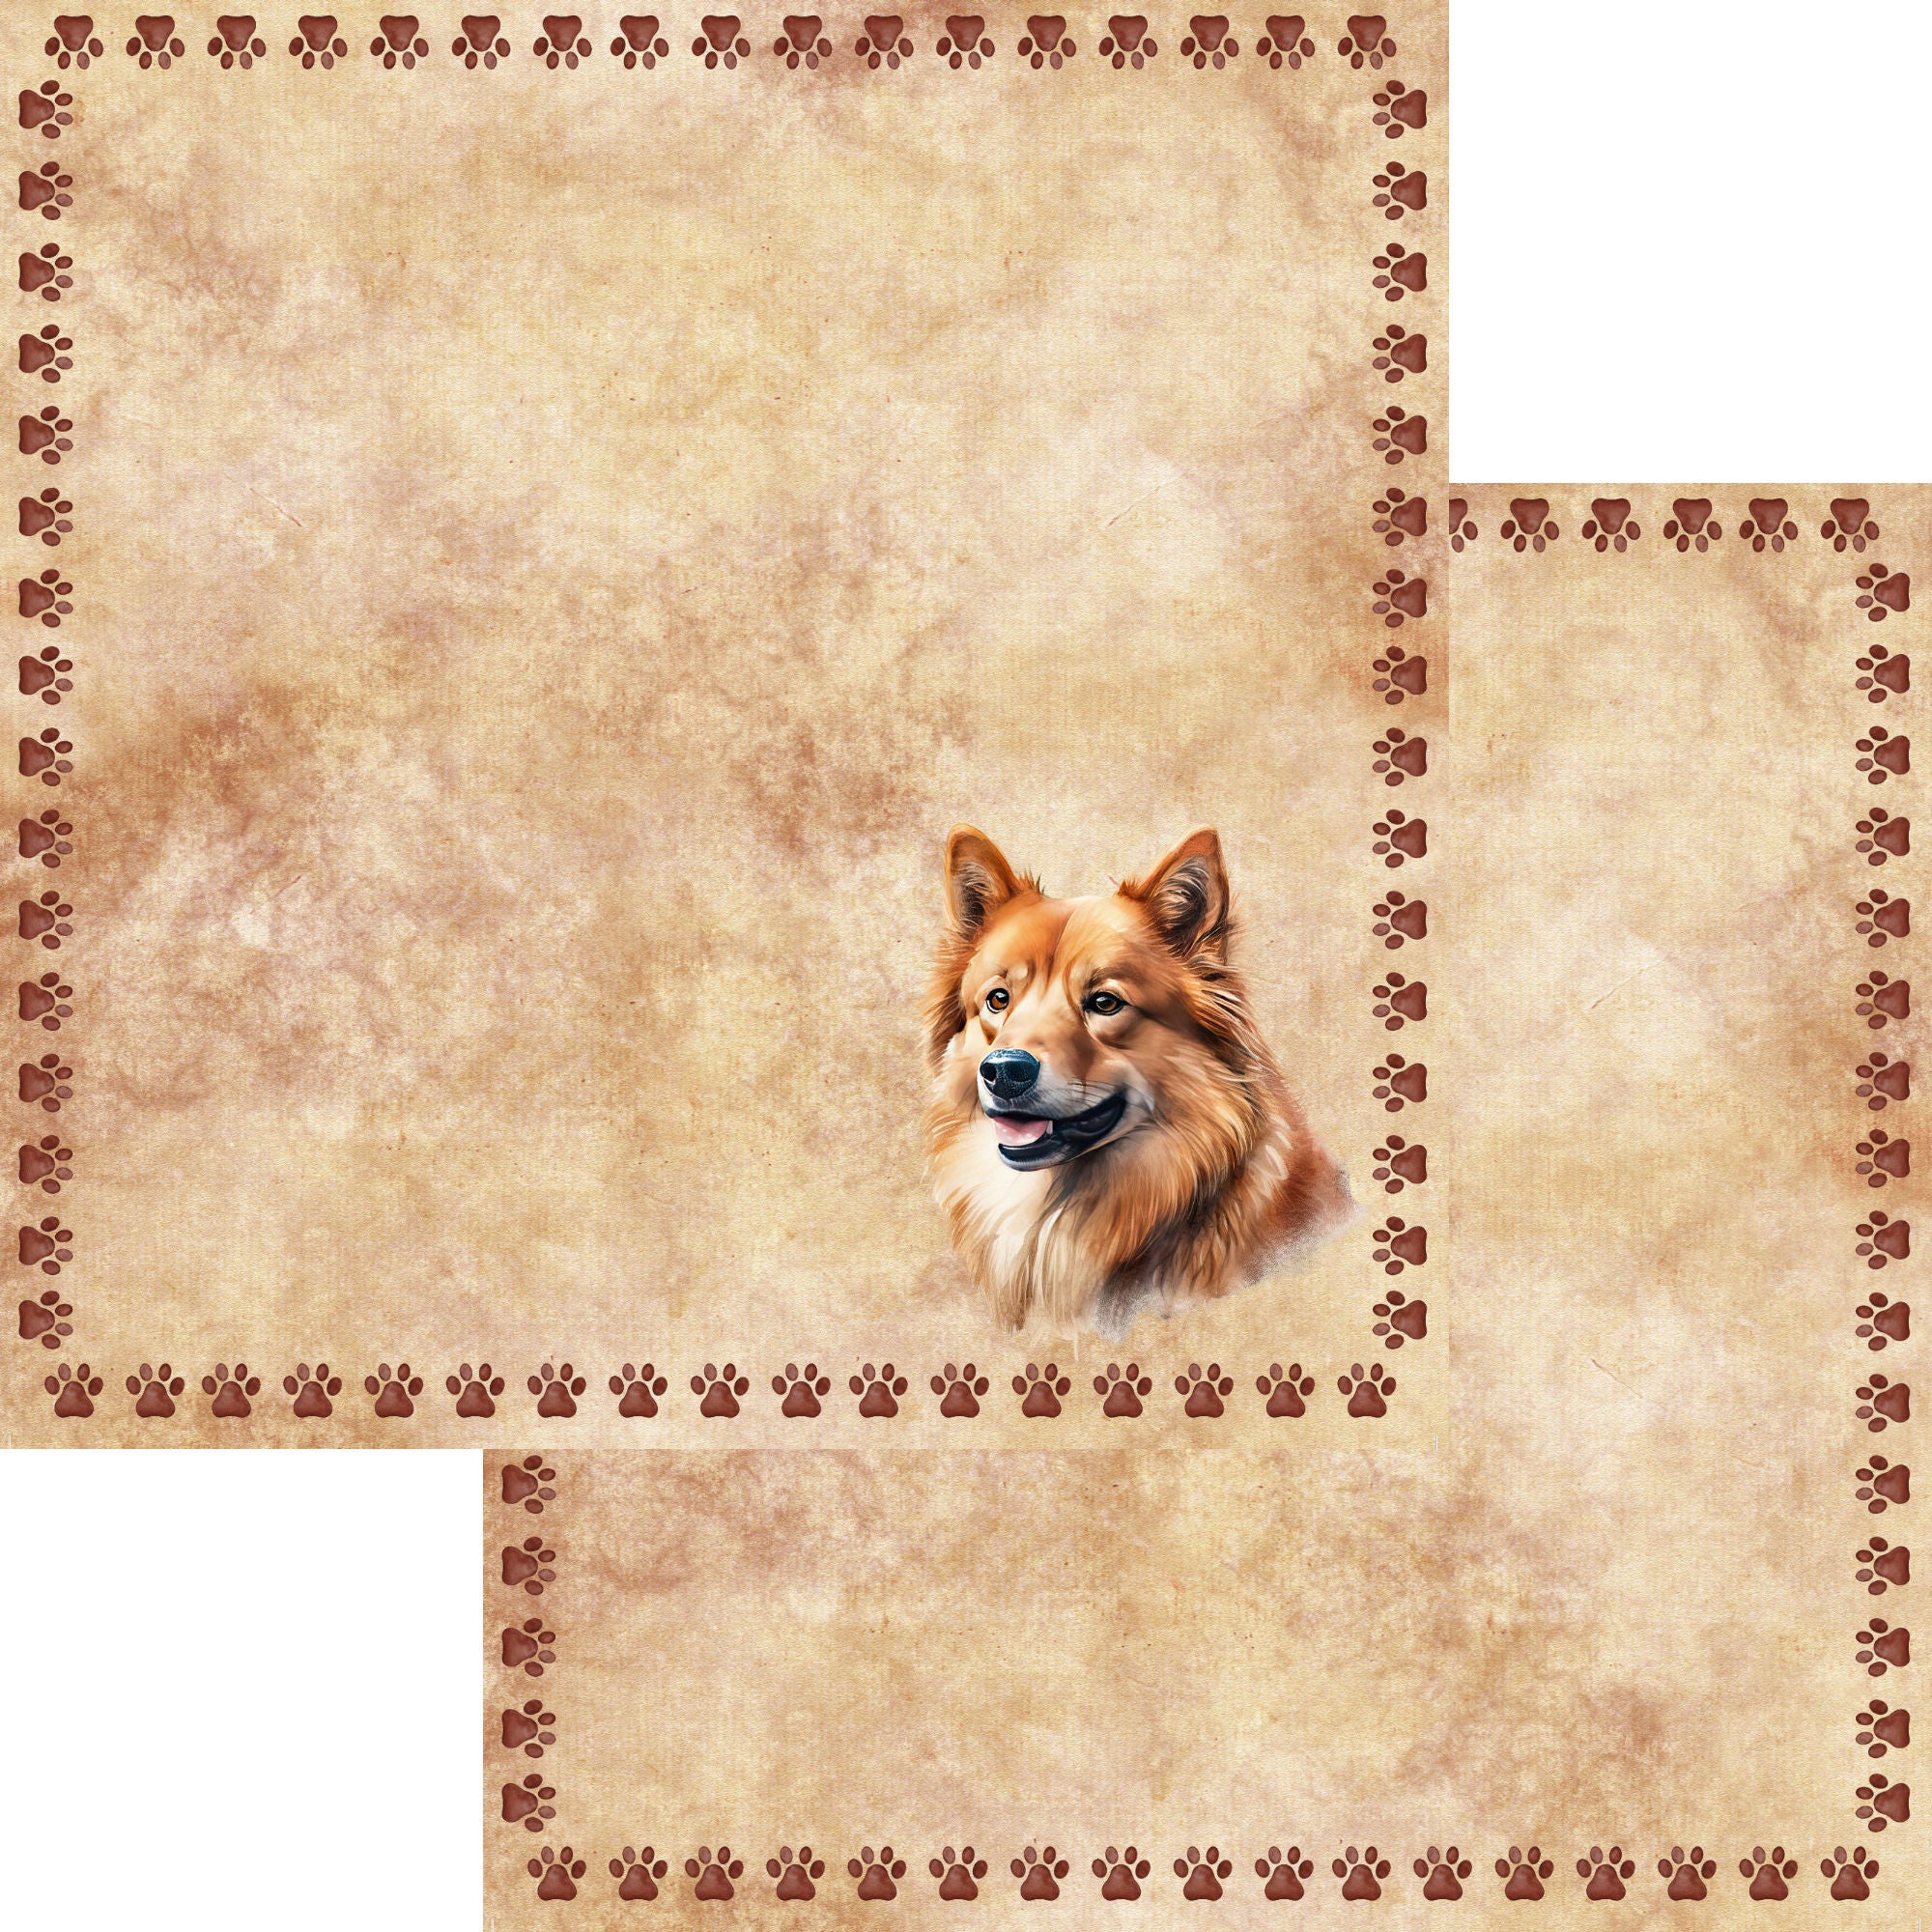 Dog Breeds Collection Finnish Spitz 12 x 12 Double-Sided Scrapbook Paper by SSC Designs